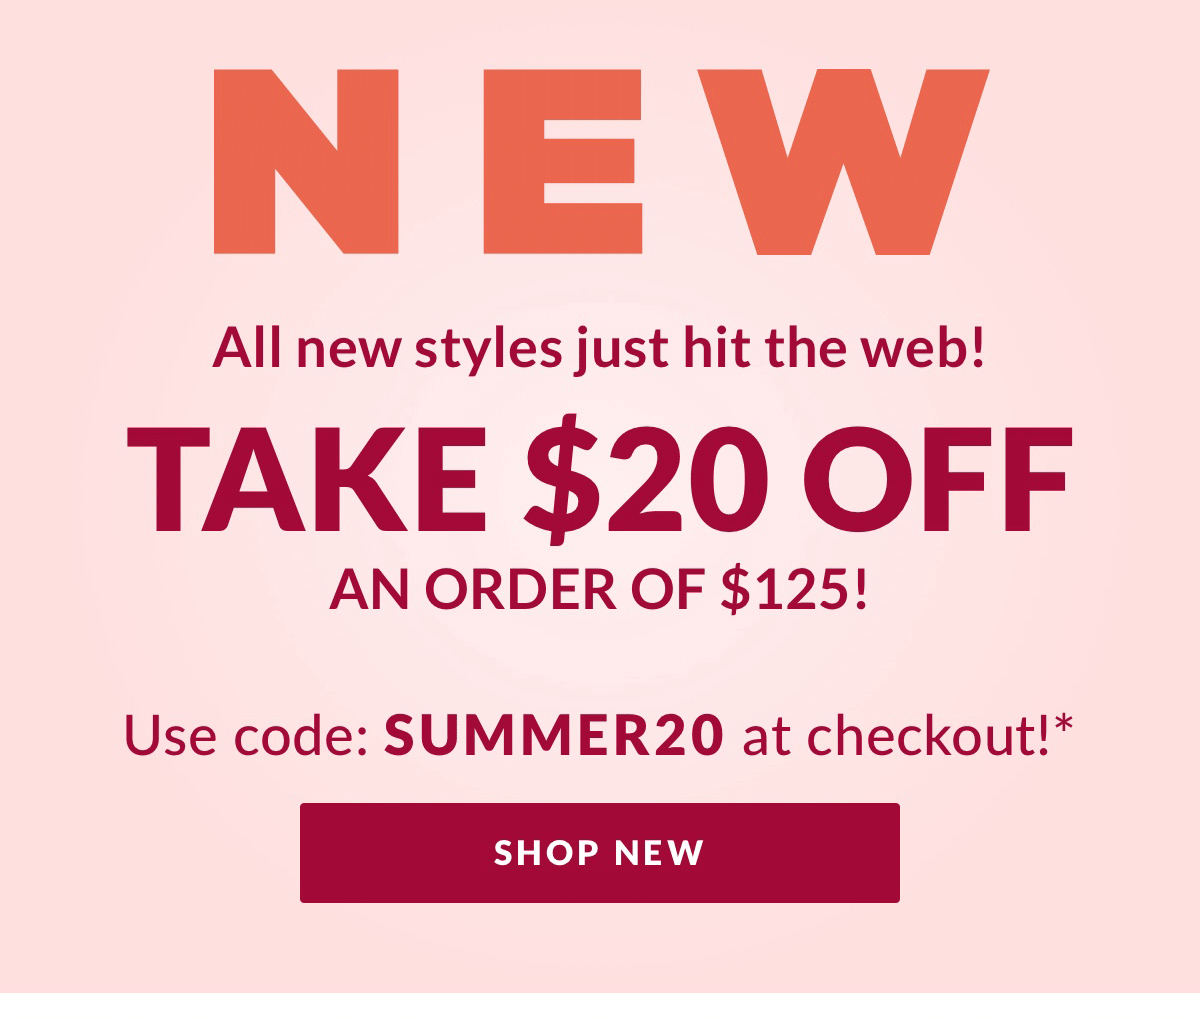 Get \\$20 off an order of \\$125 with code: SUMMER20 at checkout